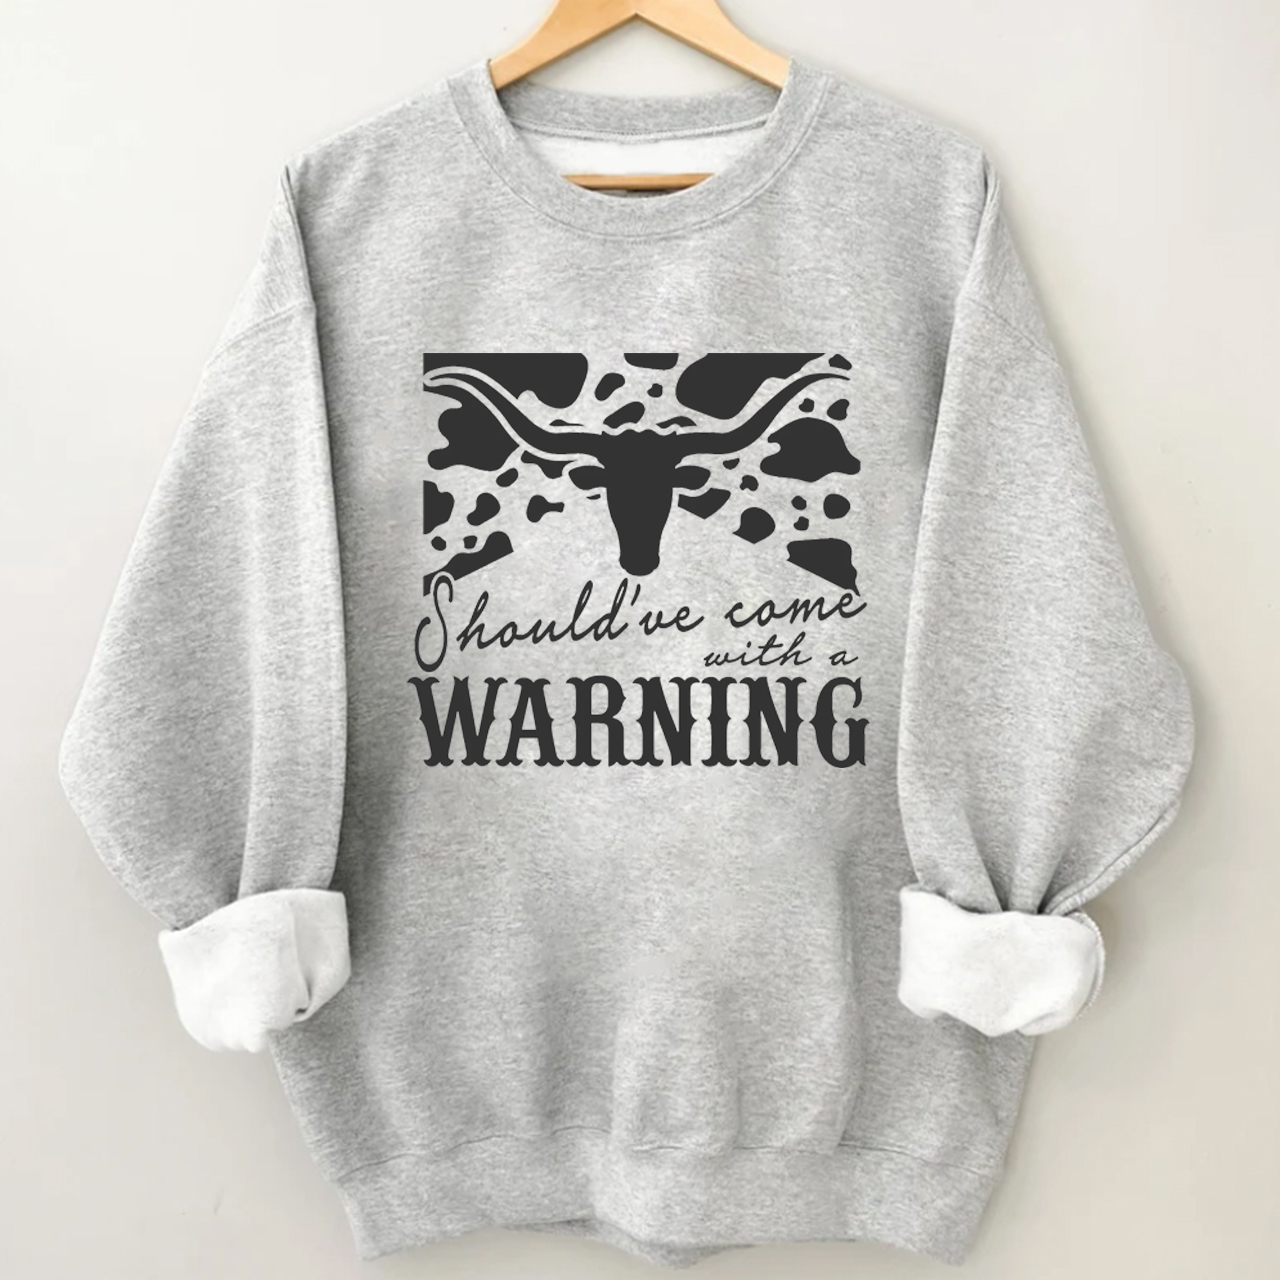 Cowboy Should have come with a Warning.jpg Sweatshirt